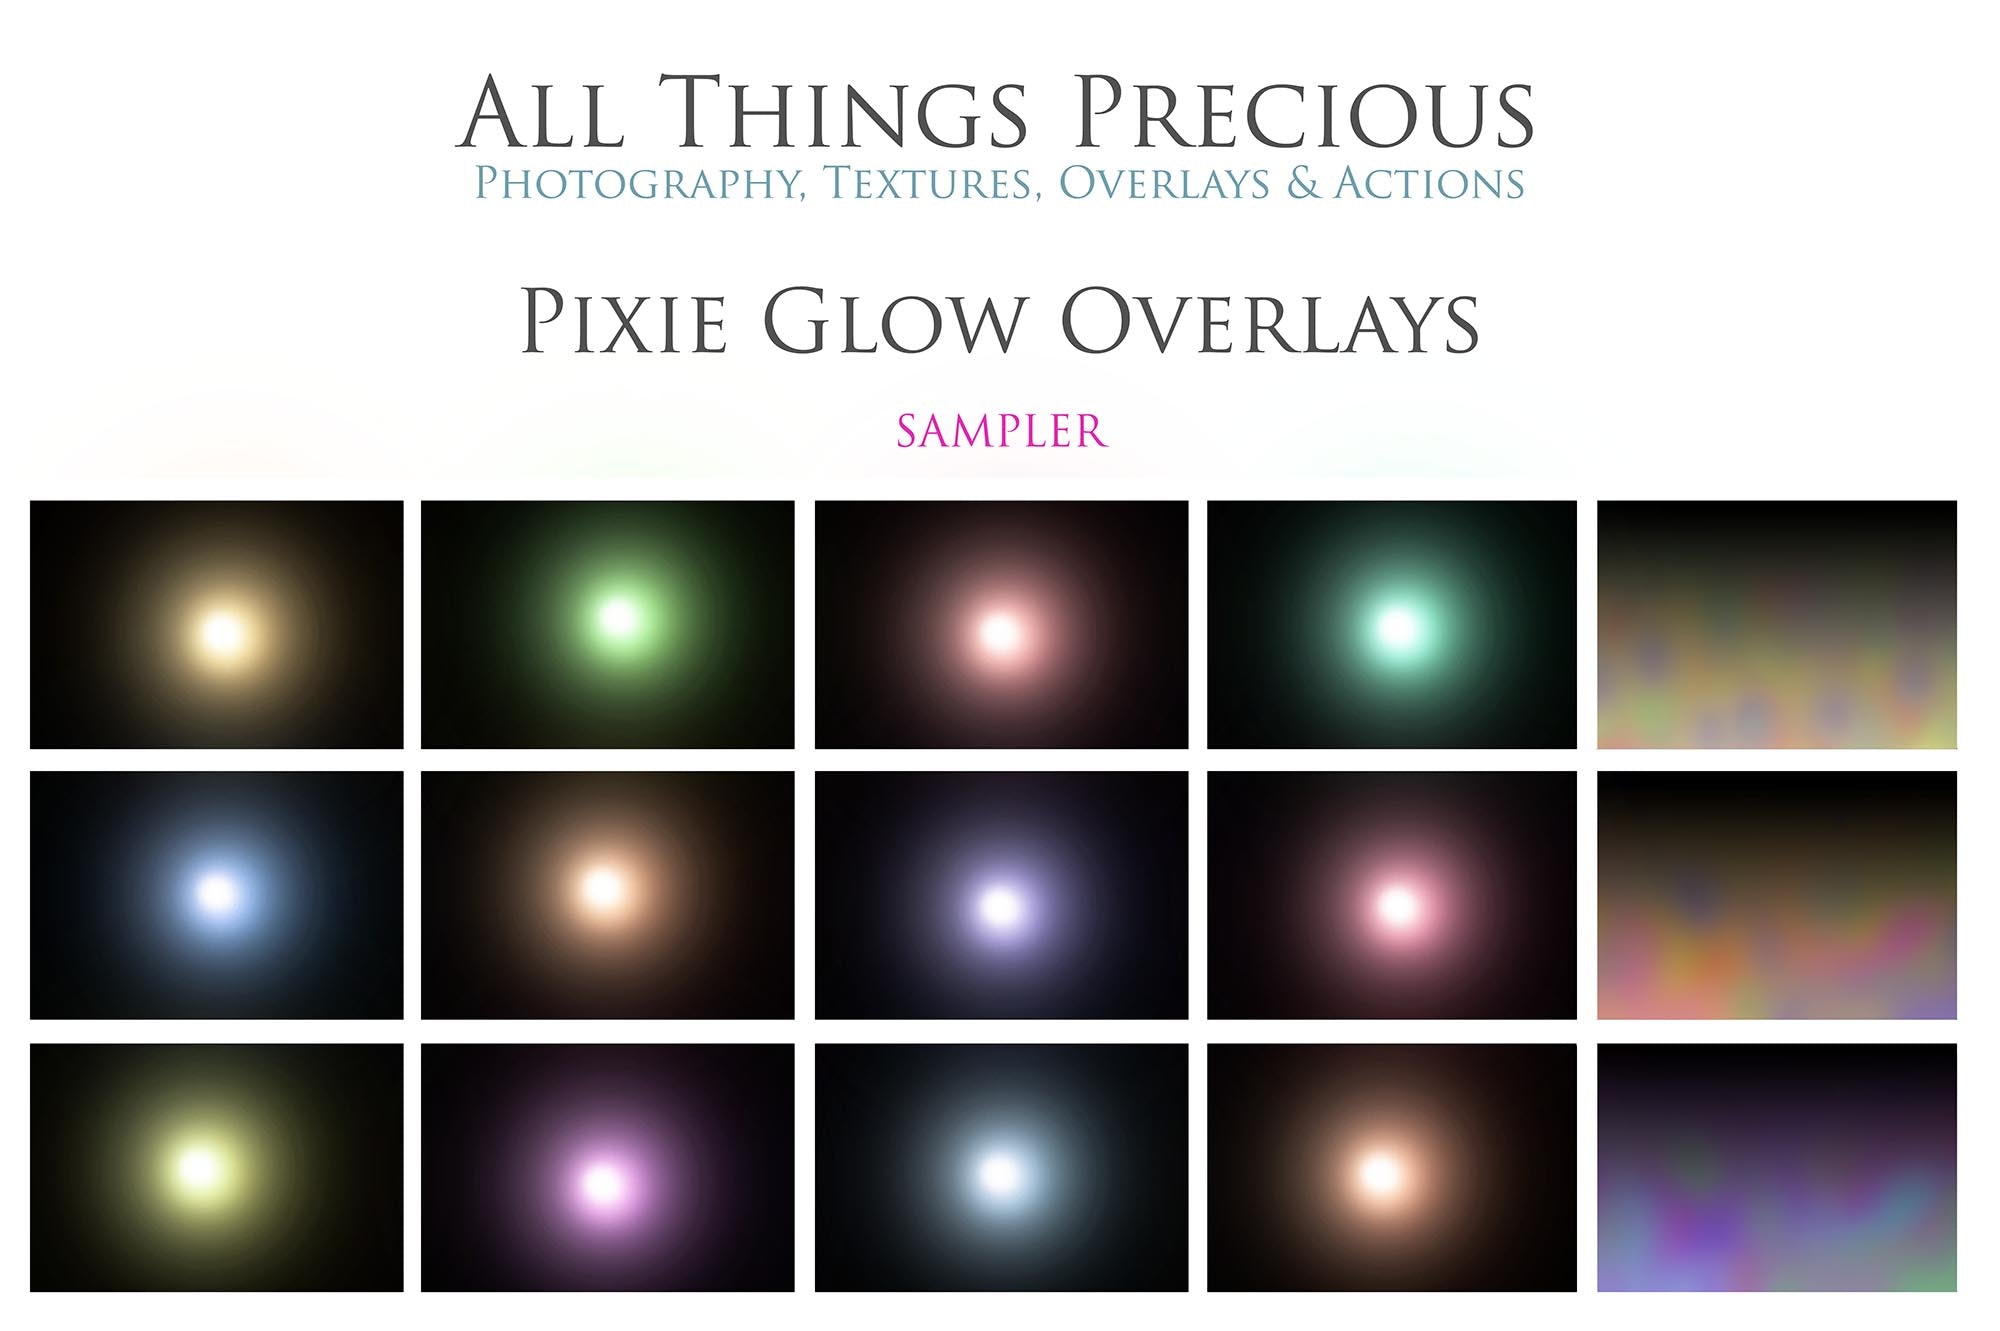 Pixie glows add to photography. Fine Art Overlays for Photographers, Digital Art and Scrapbooking. Photoshop. Fine art realistic. Printable graphic assets. In high resolution, perfect for your next edit or project! Png colourful sparkles. Sublimation art. ATP Textures